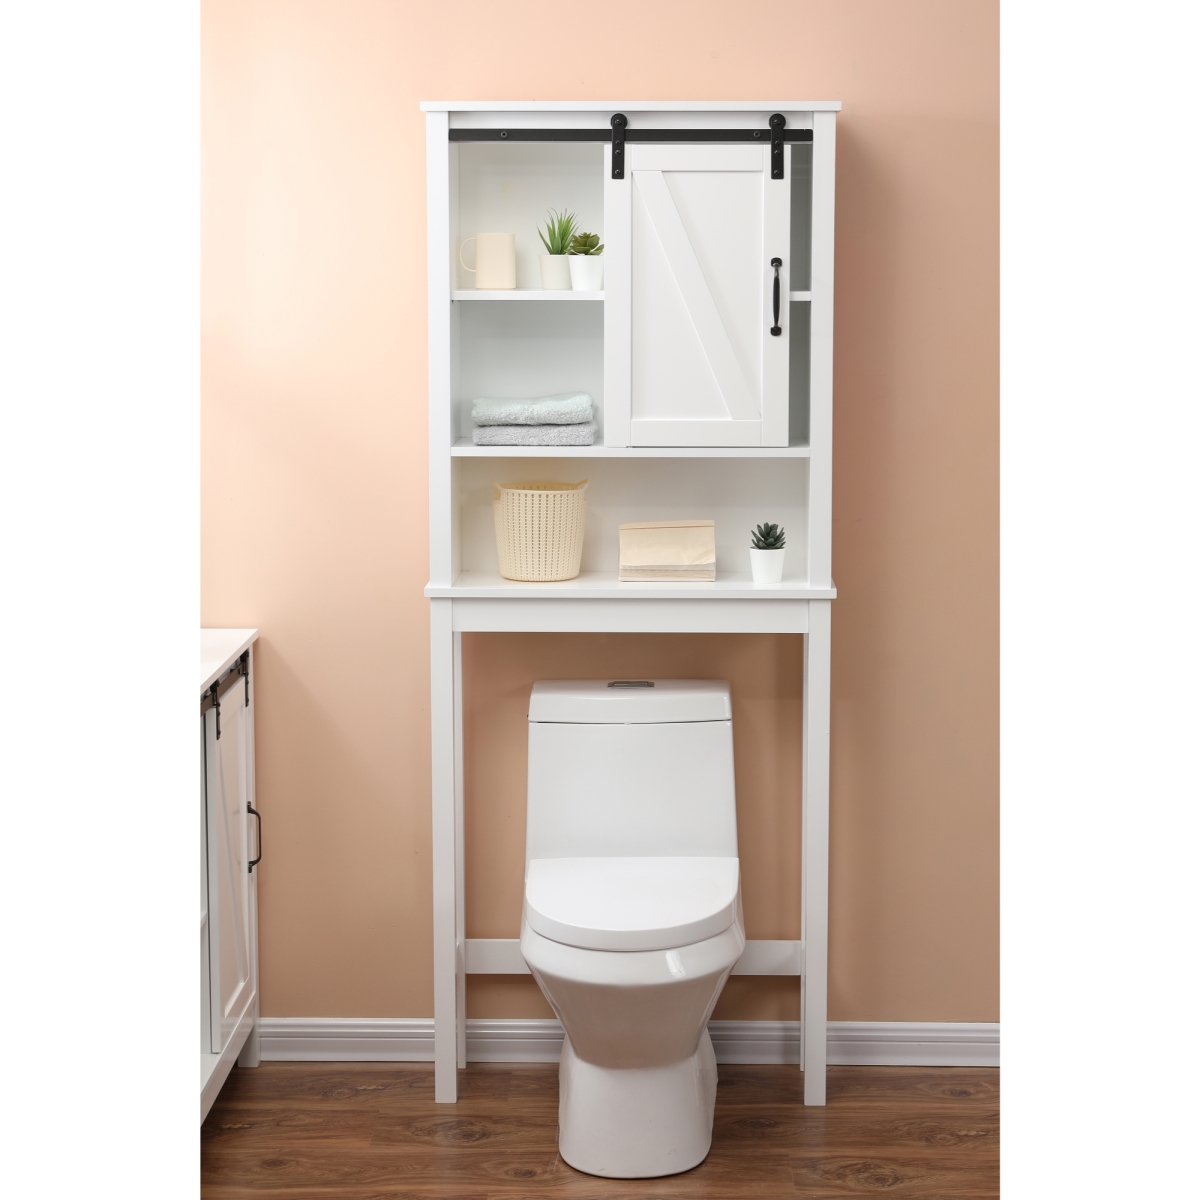 Whif959 27.2 X 66.9 X 9.1 In. Farmhouse White Mdf Over-the-toilet Space Saver Cabinet